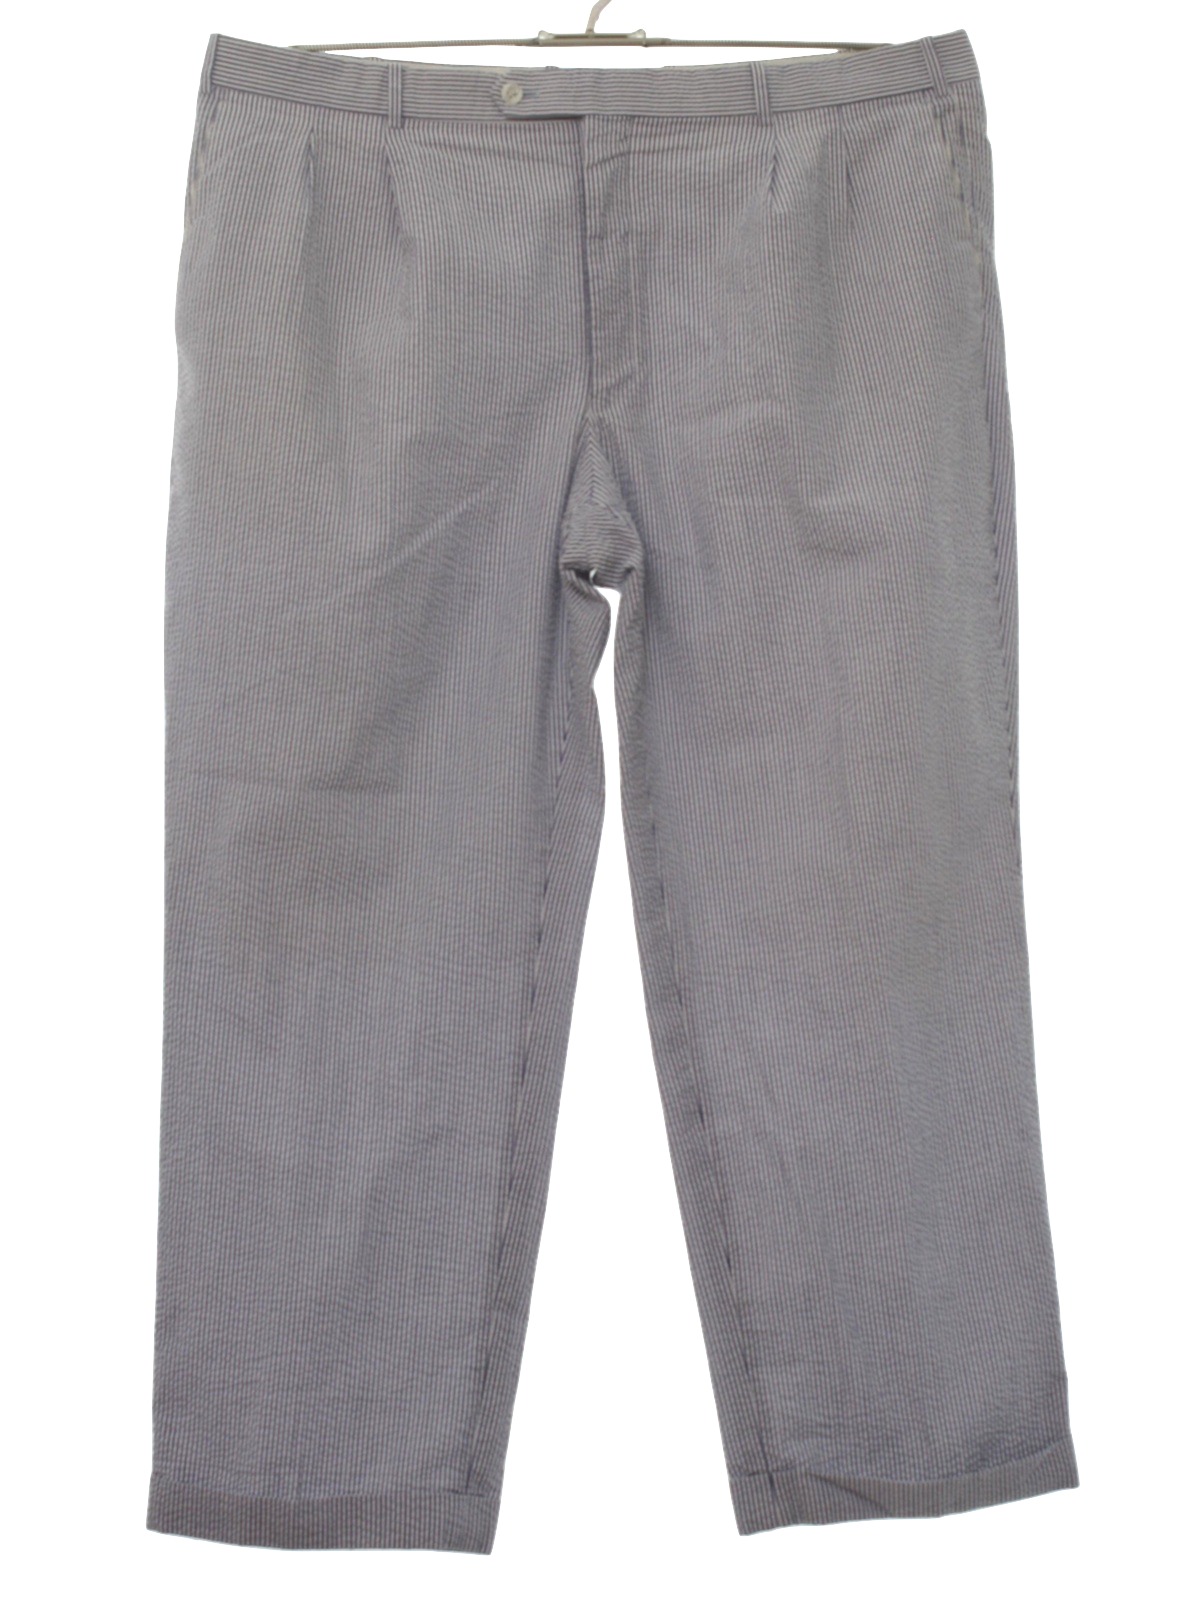 1980's Retro Pants: 80s -Reflections- Mens pale blue and white ...